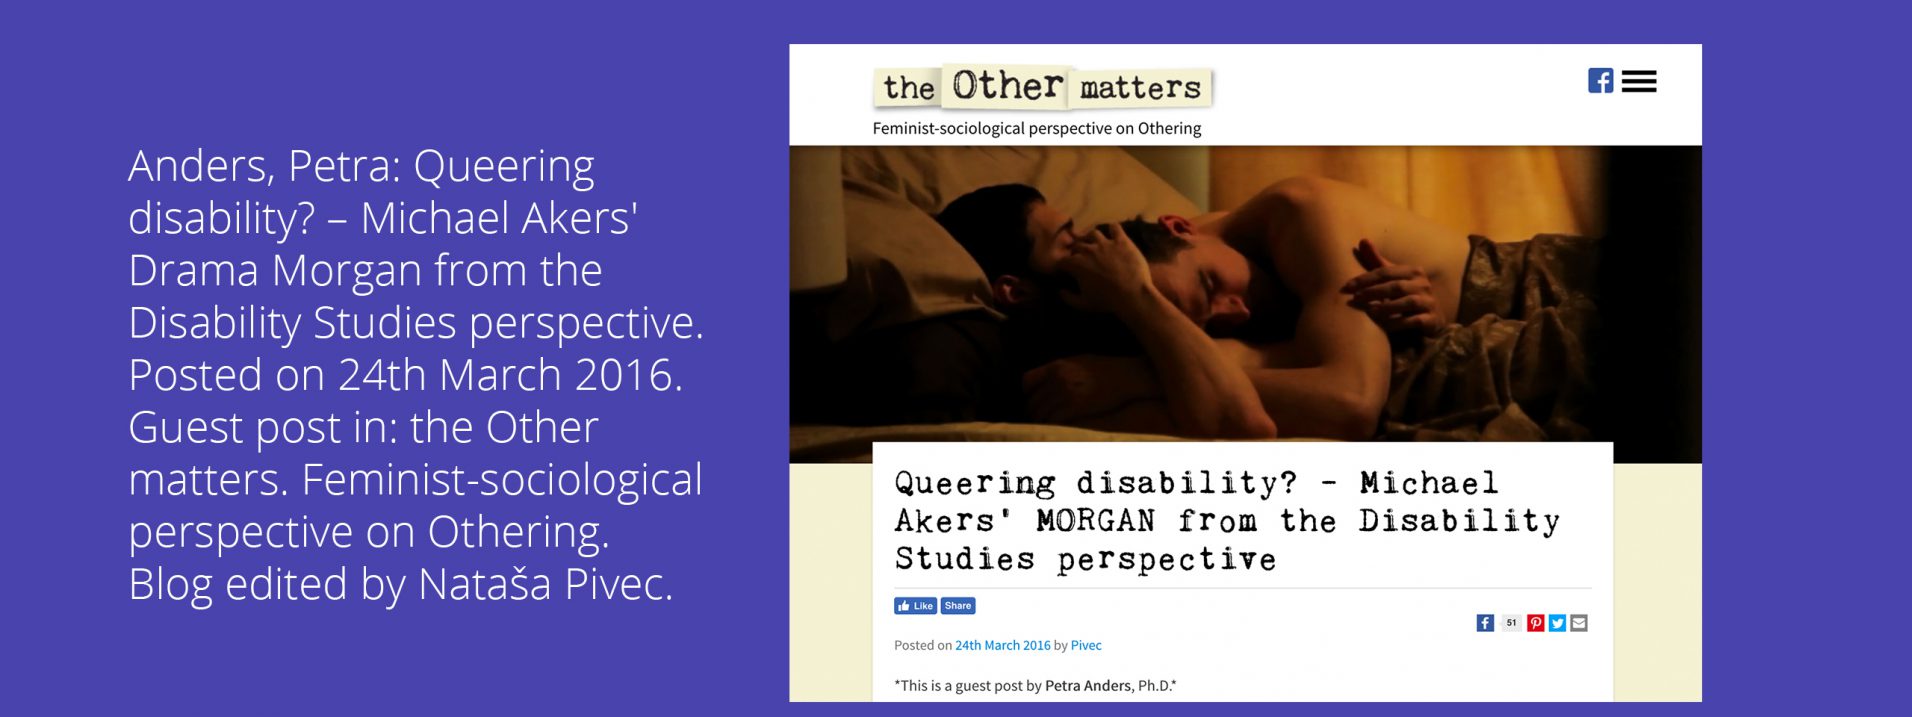 Anders, Petra: Queering disability? – Michael Akers' Drama Morgan from the Disability Studies perspective. Posted on 24th March 2016. Guest post in: the Other matters. Feminist-sociological perspective on Othering. Blog edited by Nataša Pivec.